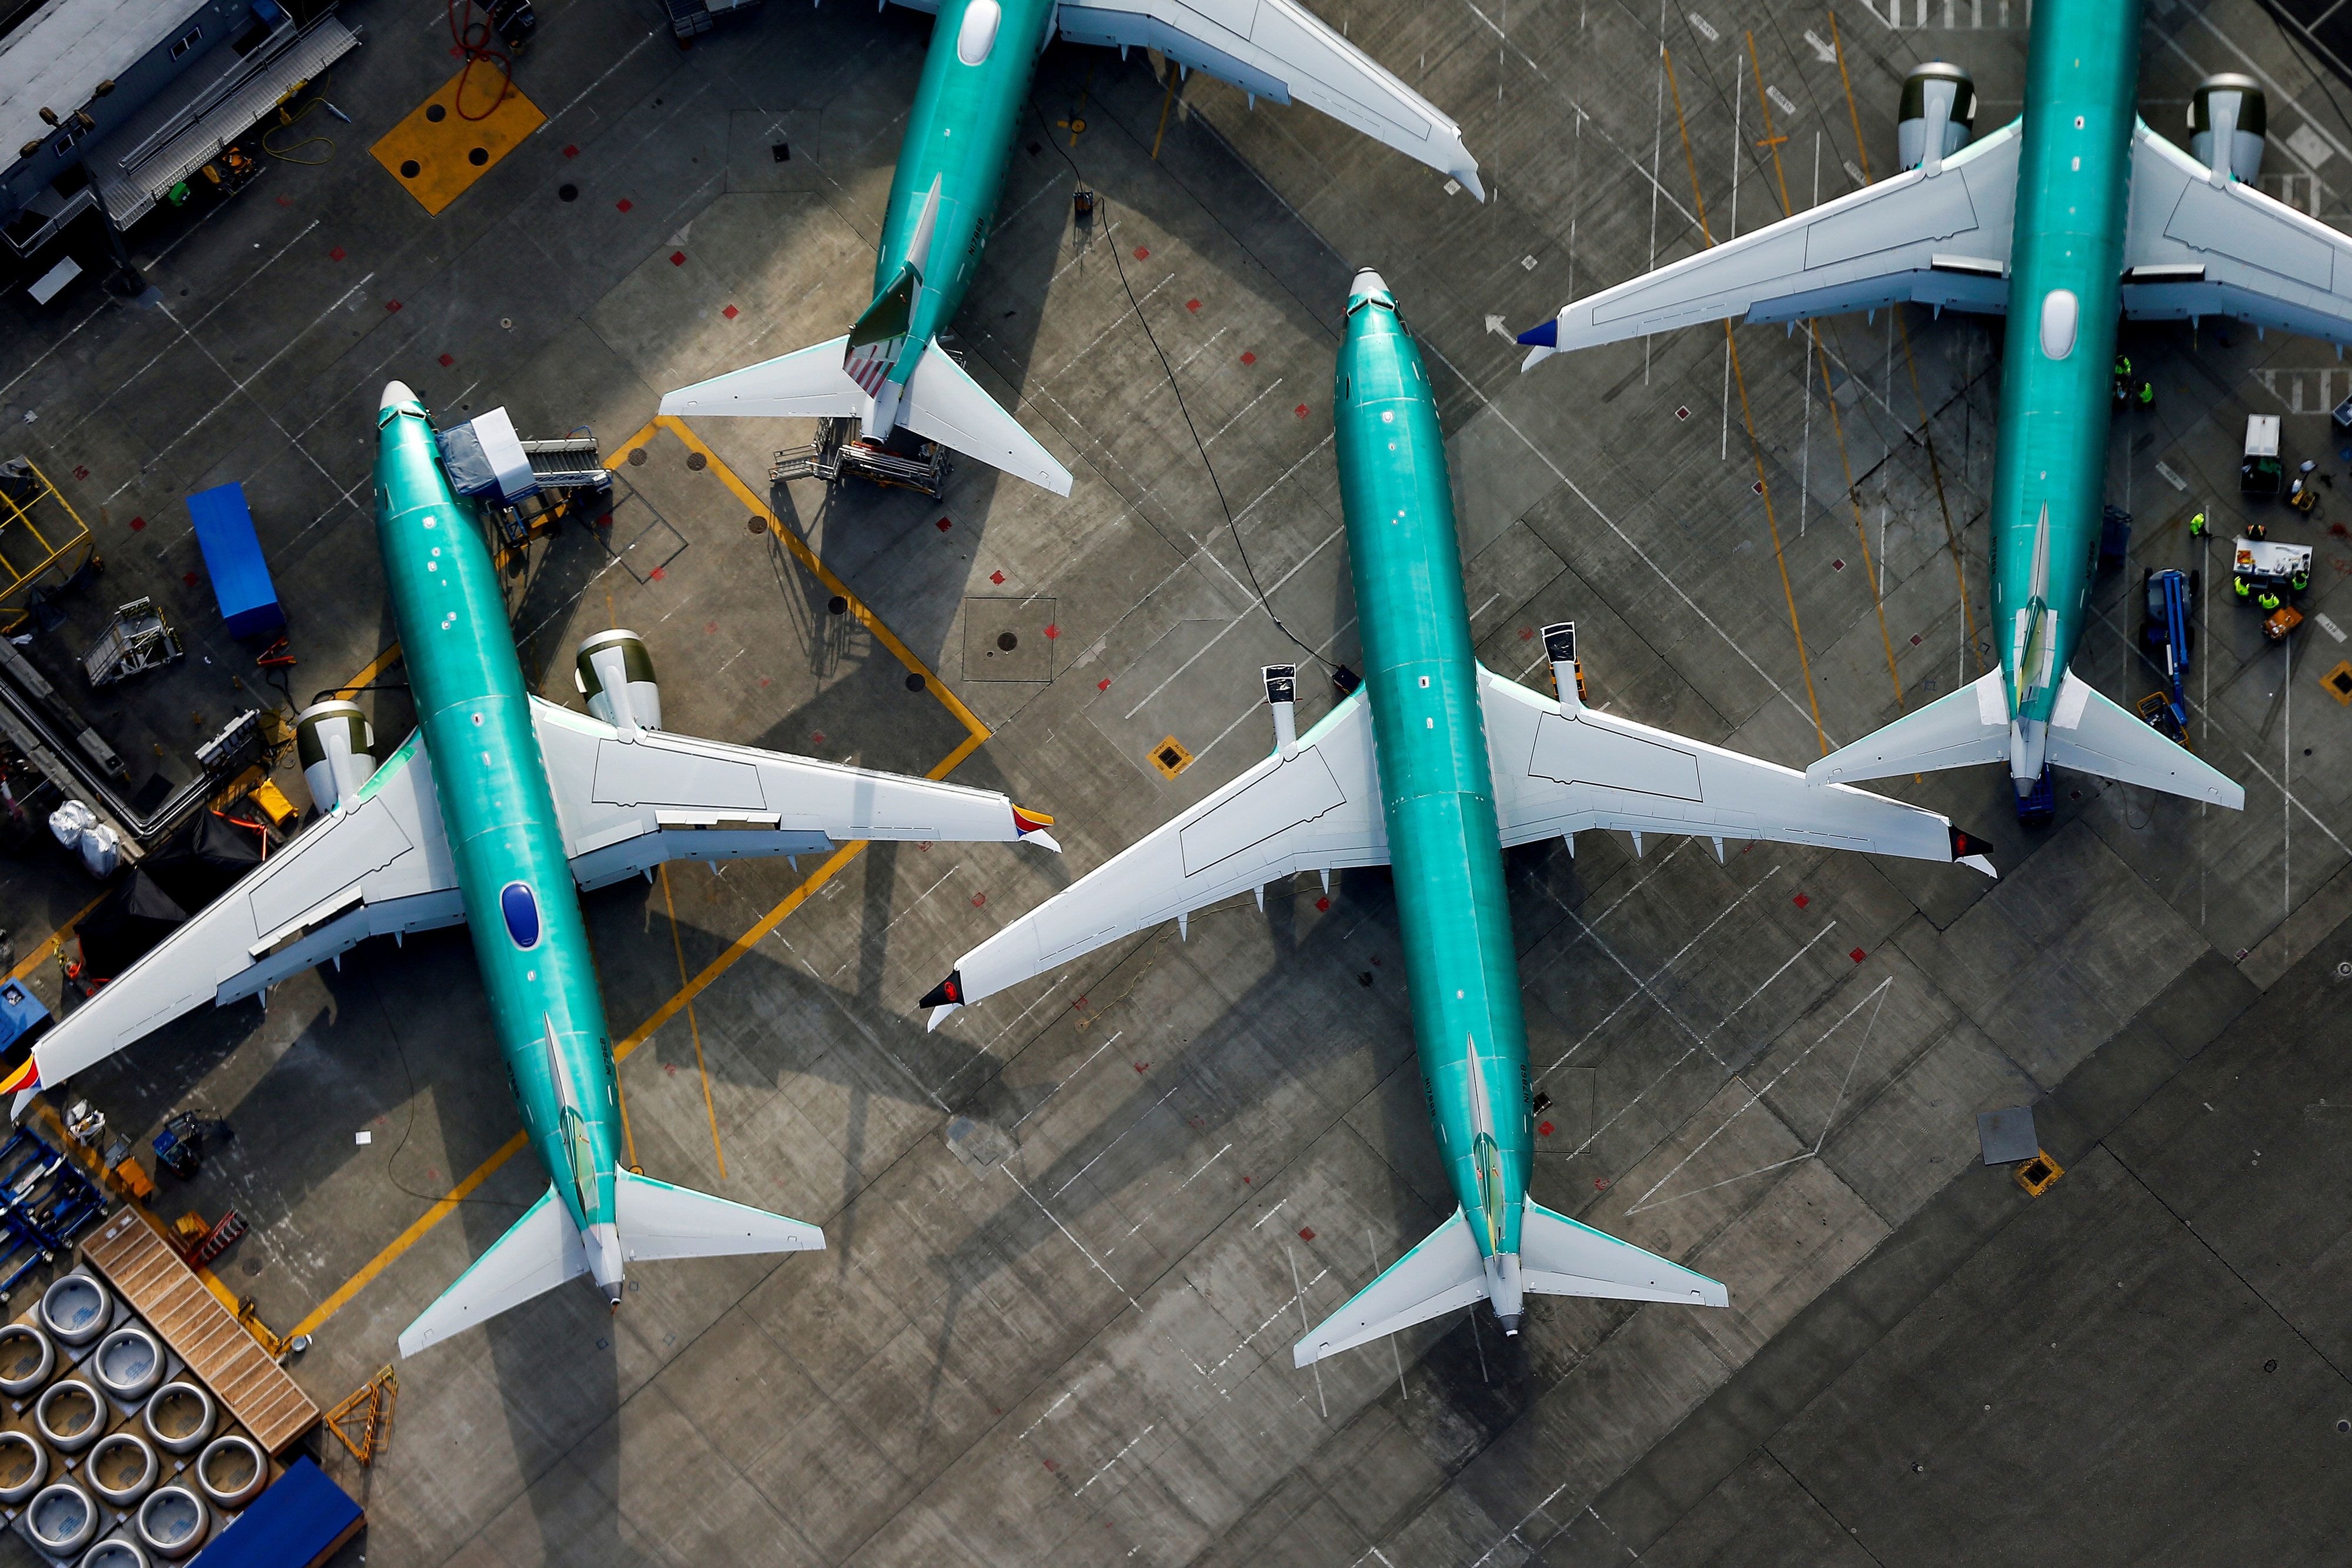 FAA expects Boeing to submit software fix for 737 Max in next week